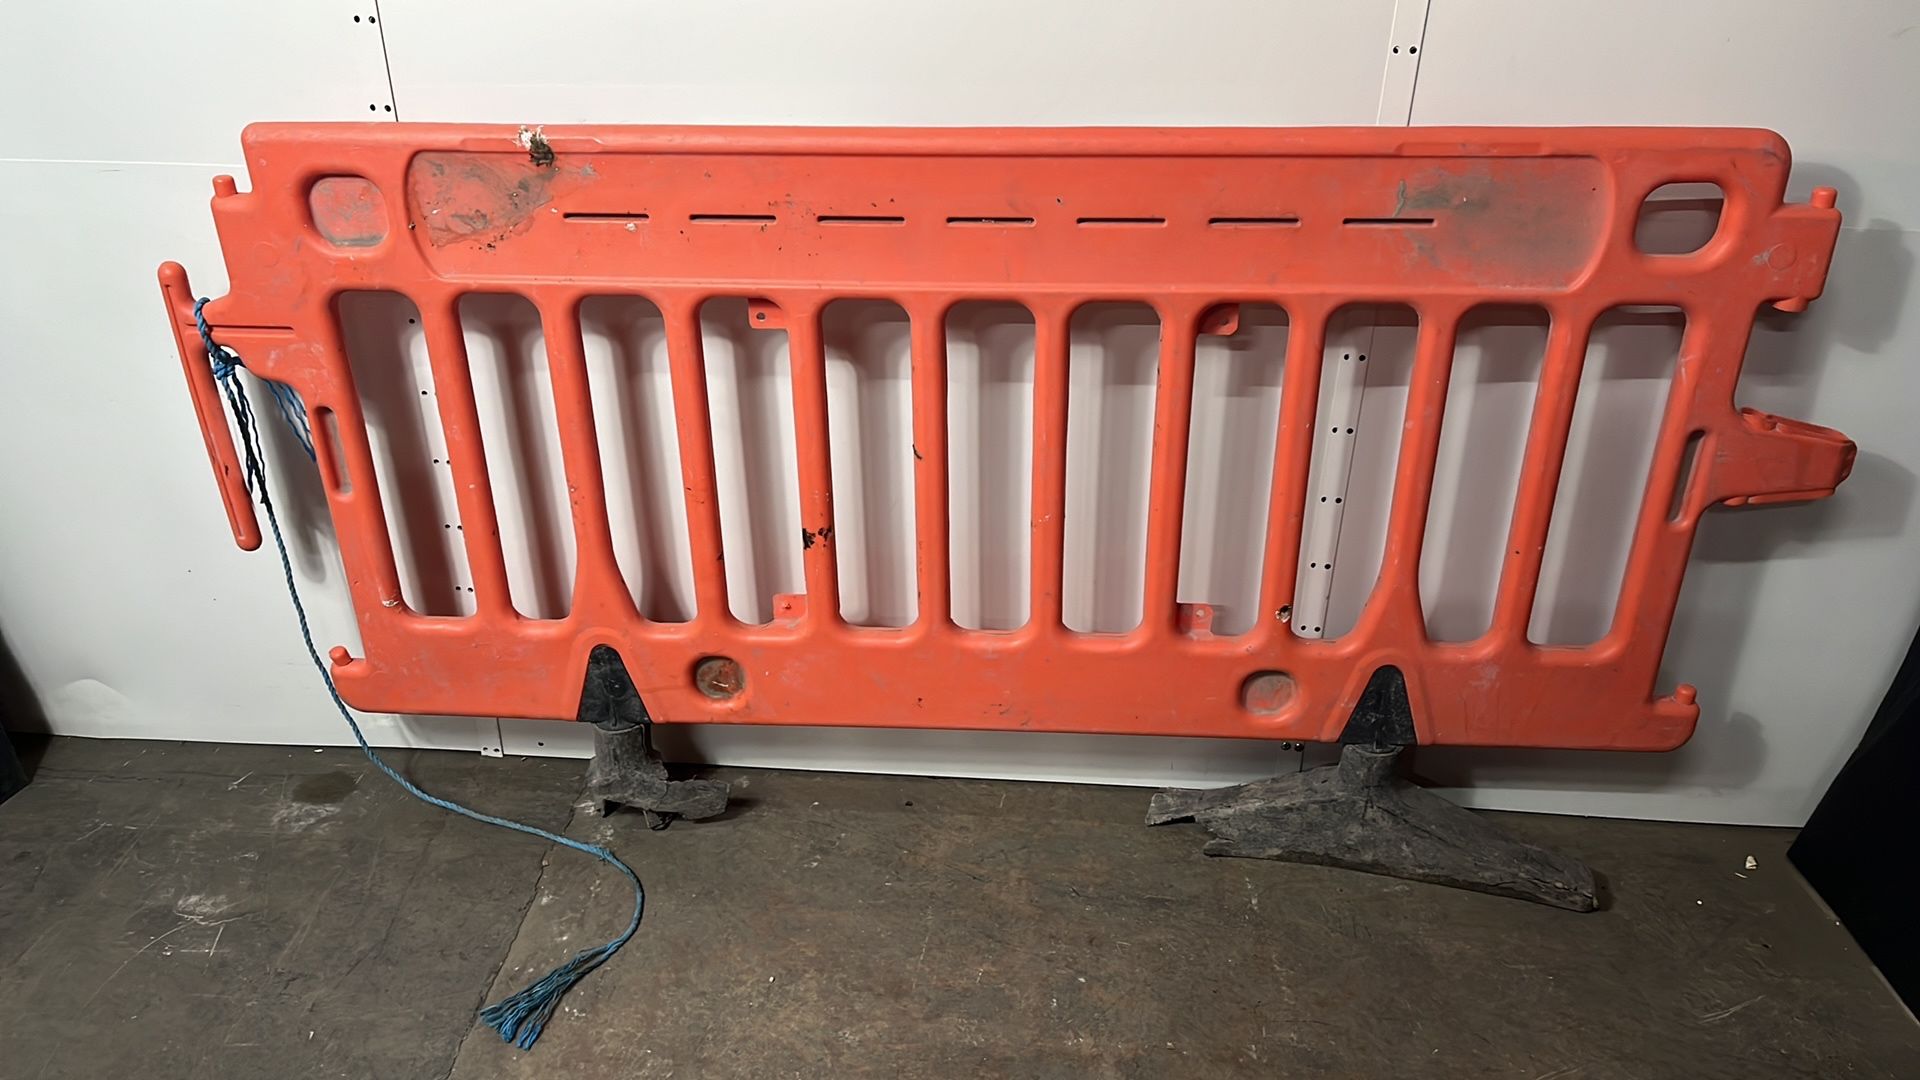 4 x Construction/Road Work Safety Barriers